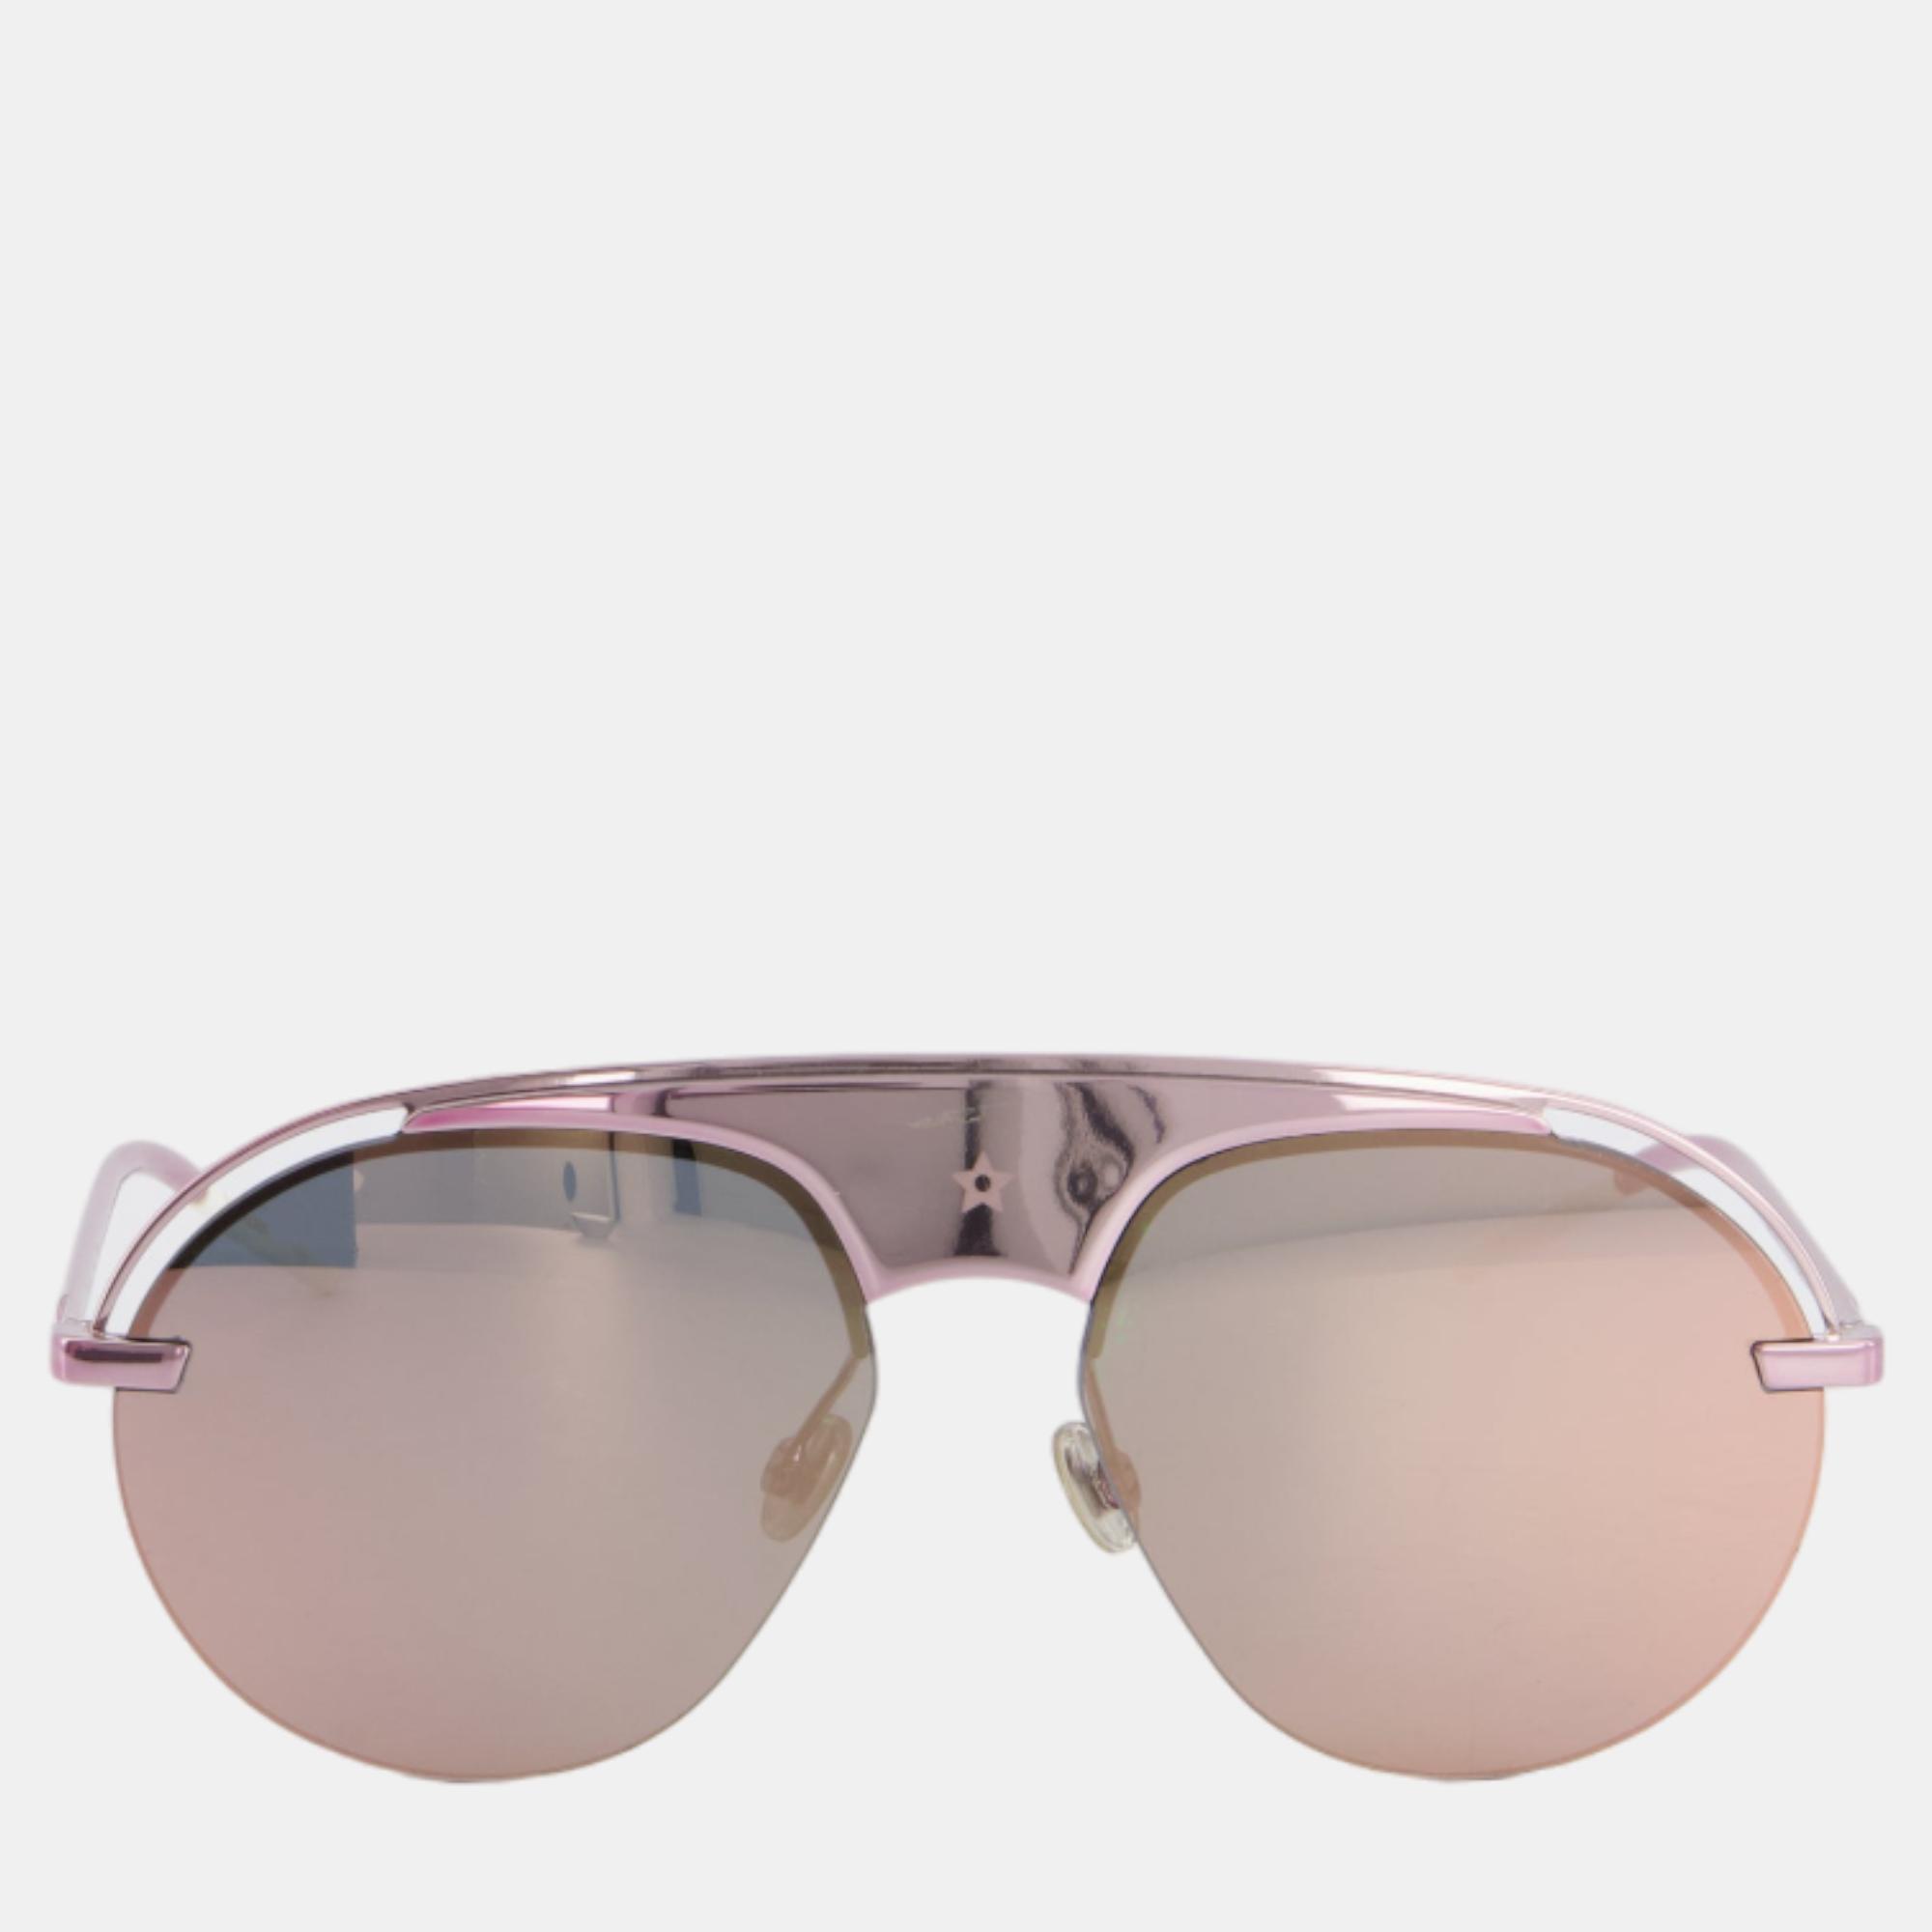 Elevate your eyewear game with these Dior sunglasses. Meticulously crafted from premium materials they offer unparalleled protection and a timeless design making them a must have accessory for the fashion forward.